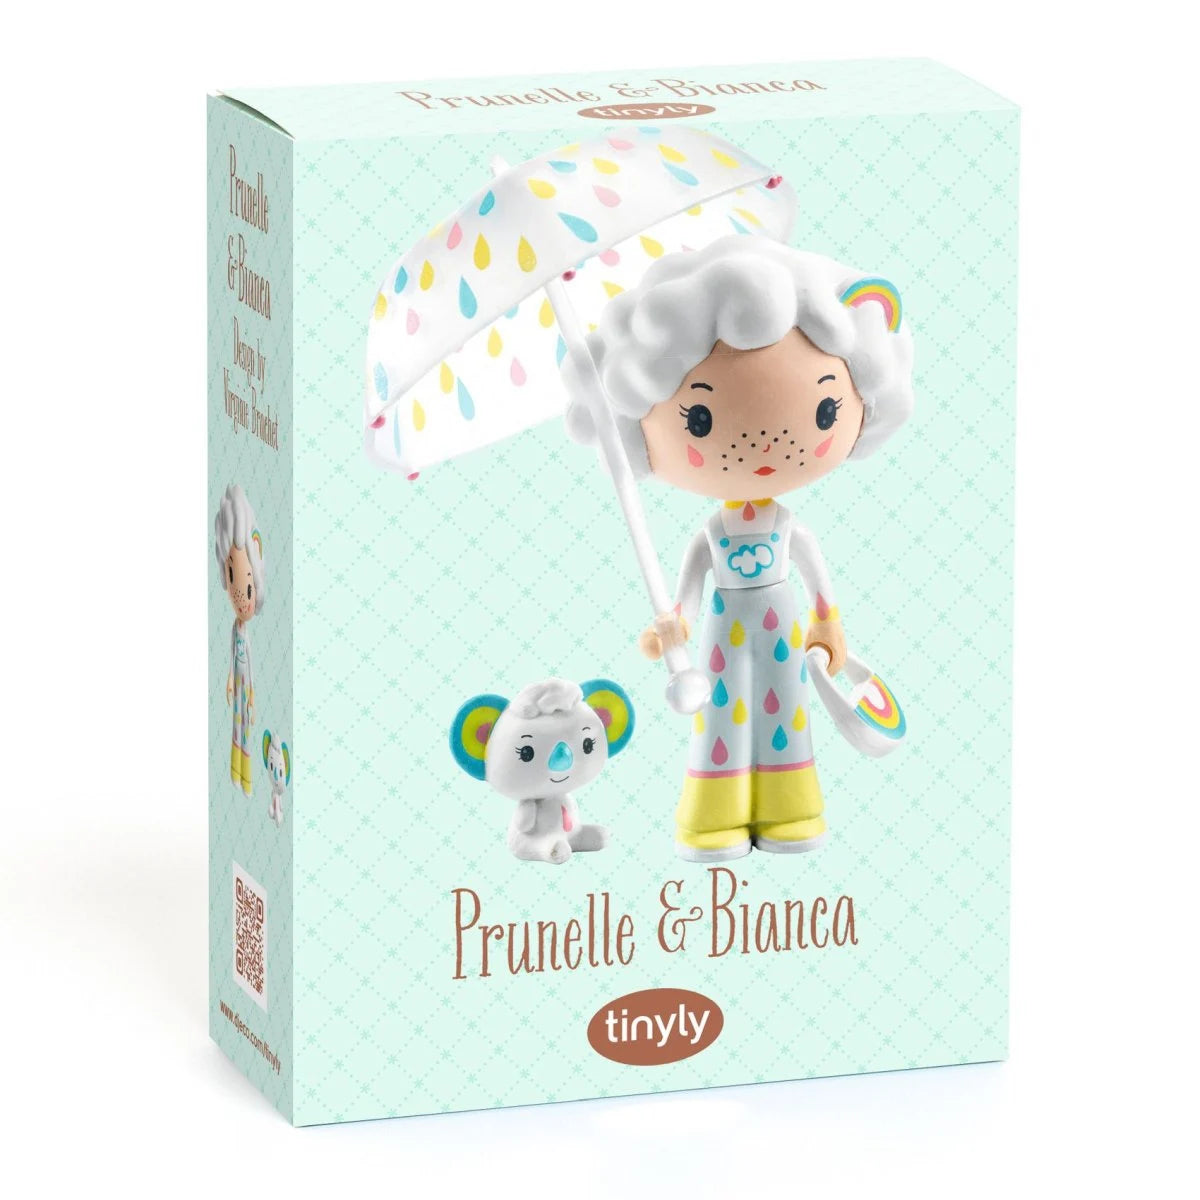 Tinyly: Prunelle & Bianca